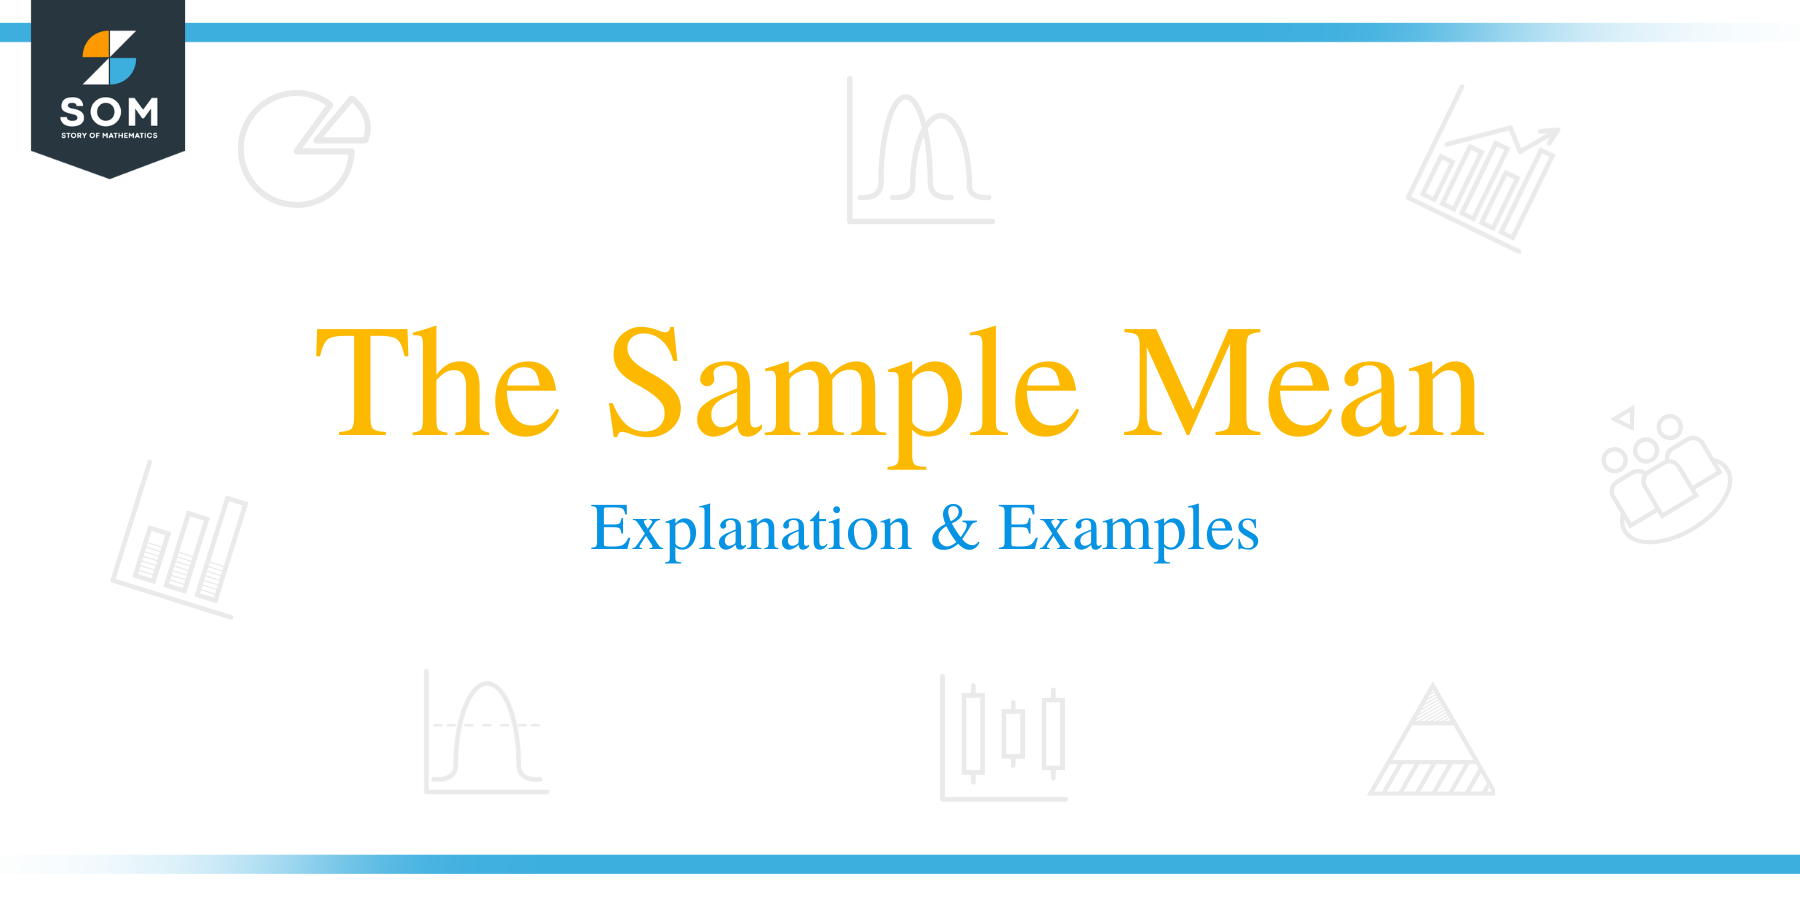 The Sample Mean